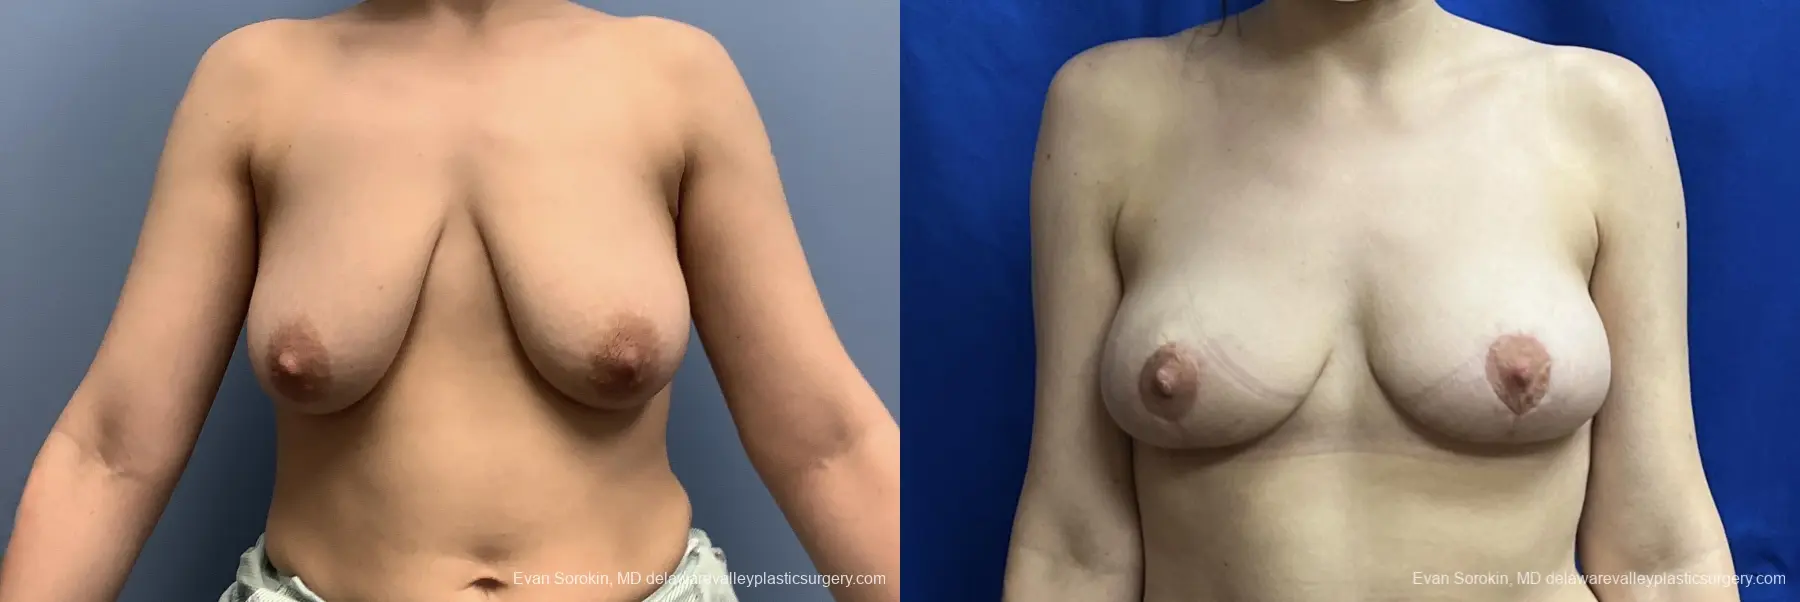 Breast Lift: Patient 3 - Before and After 1